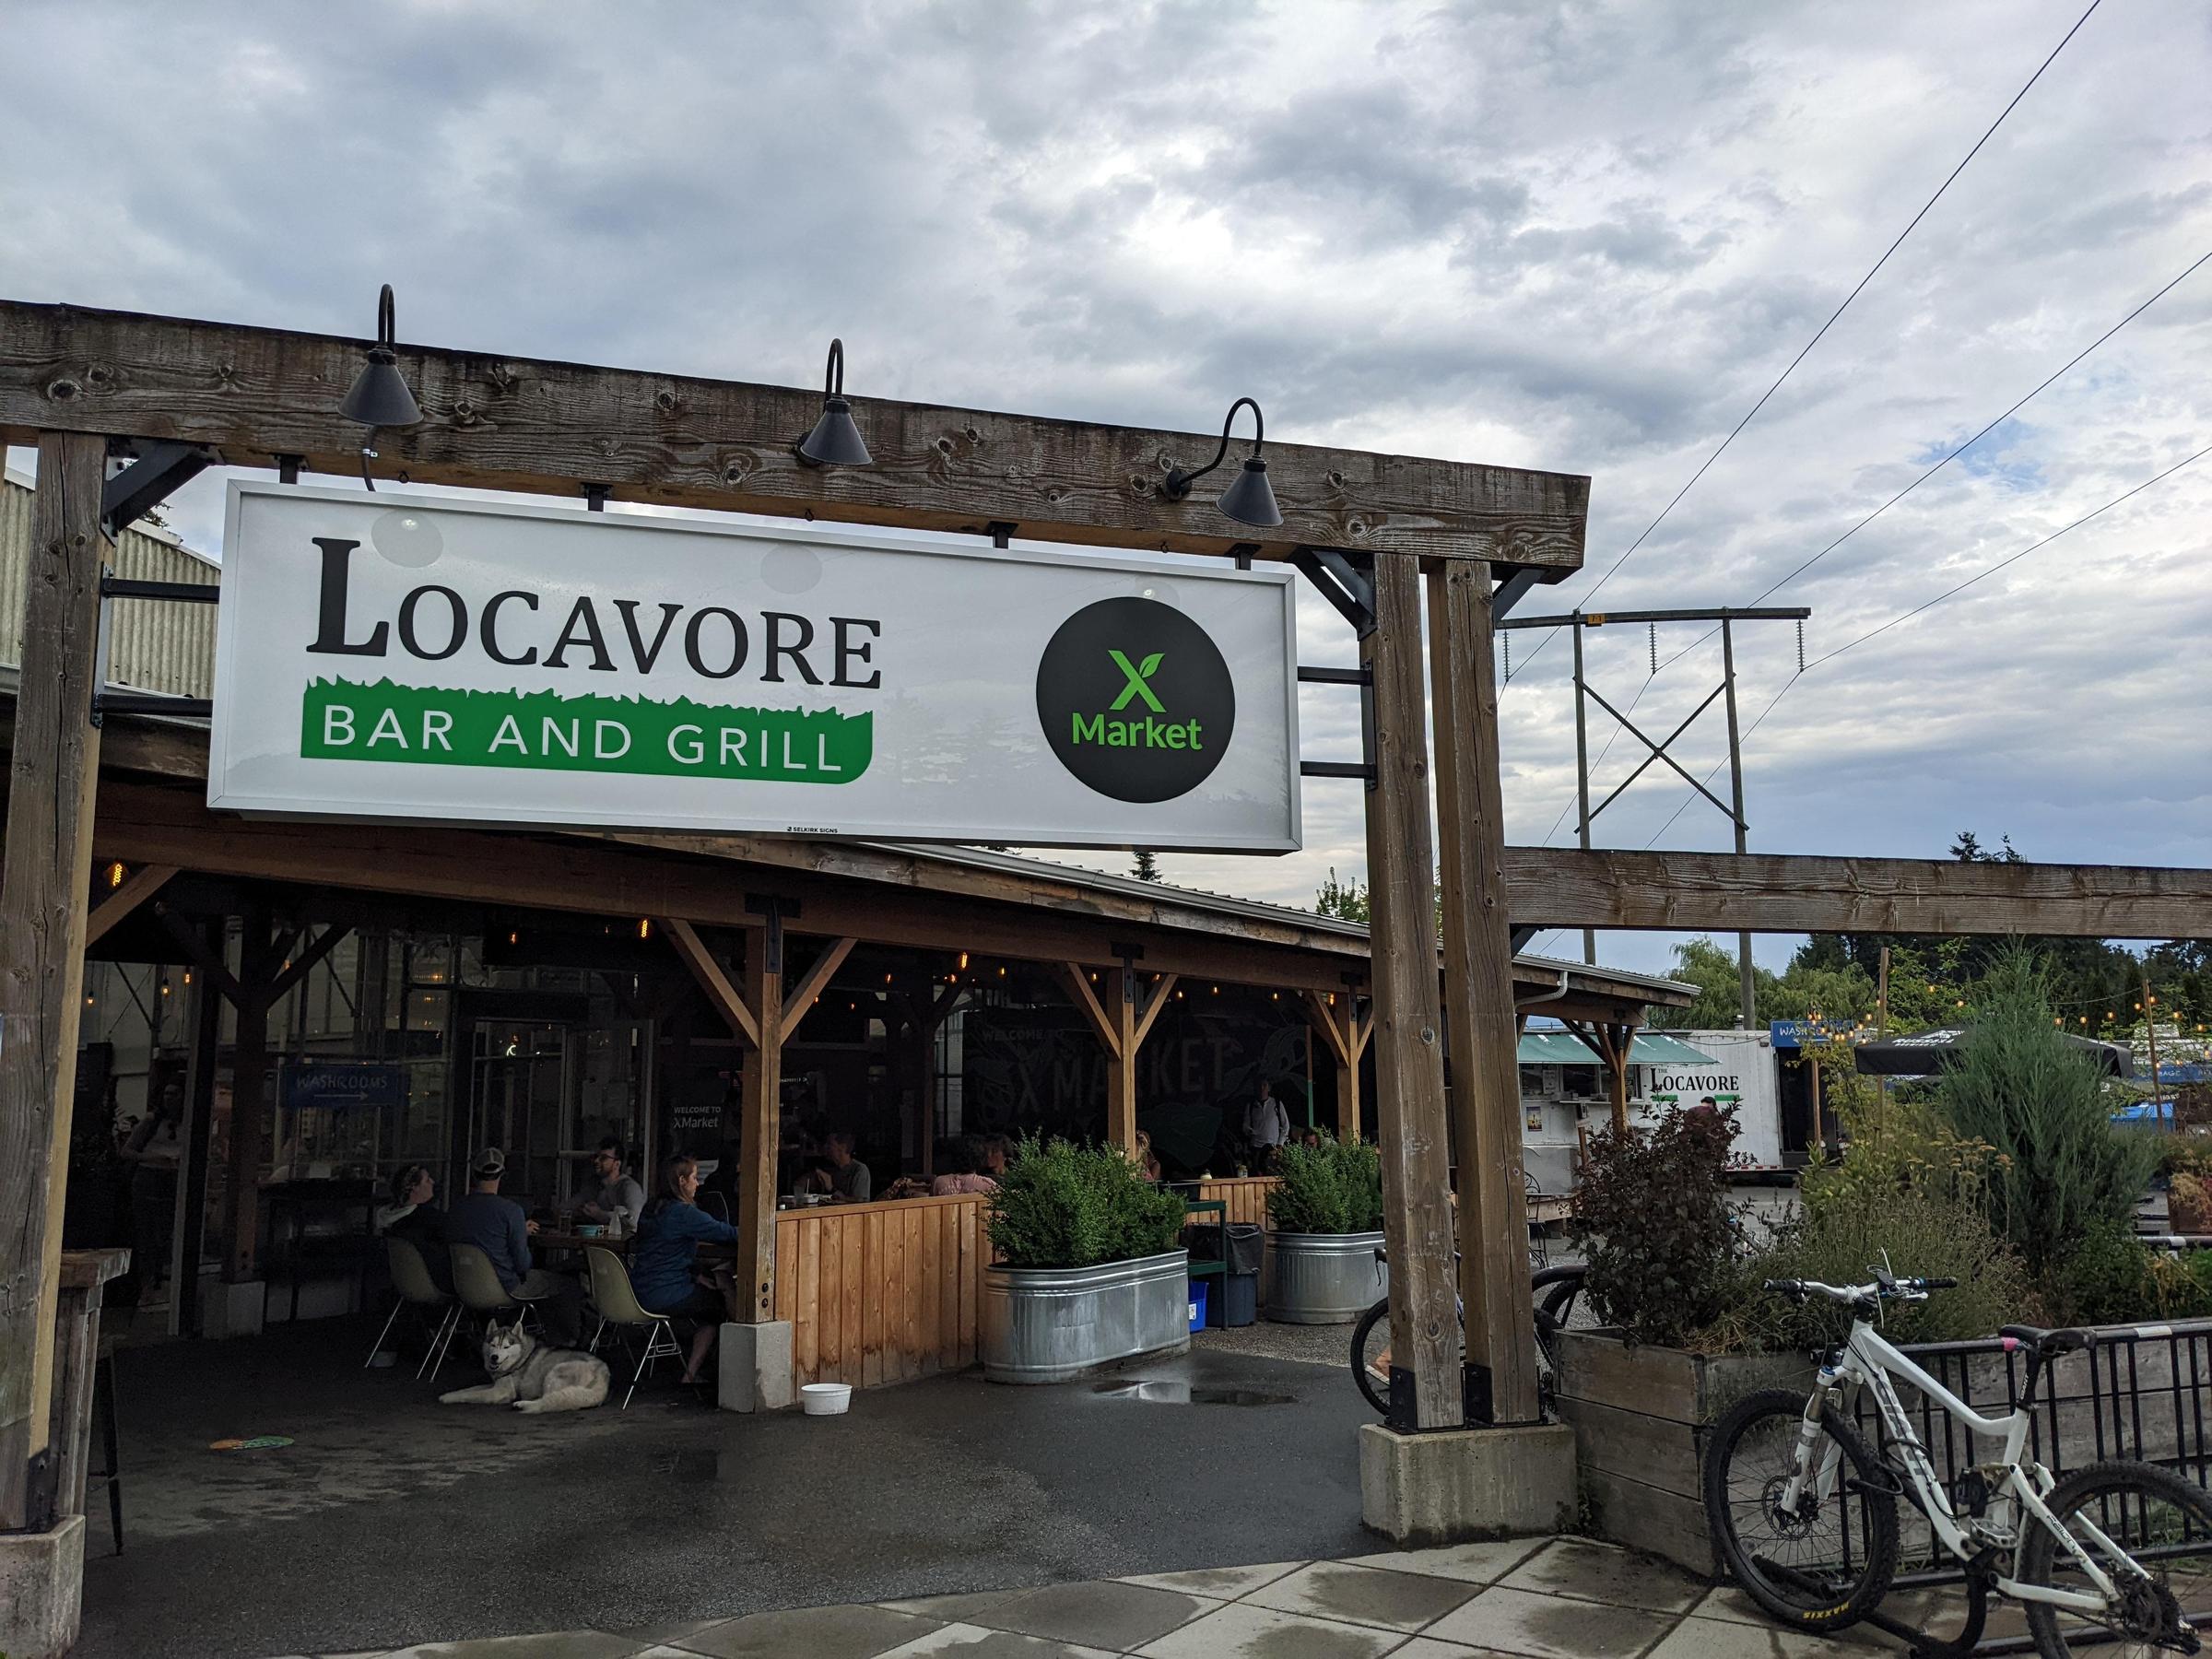 Pet Friendly The Locavore Bar & Grill